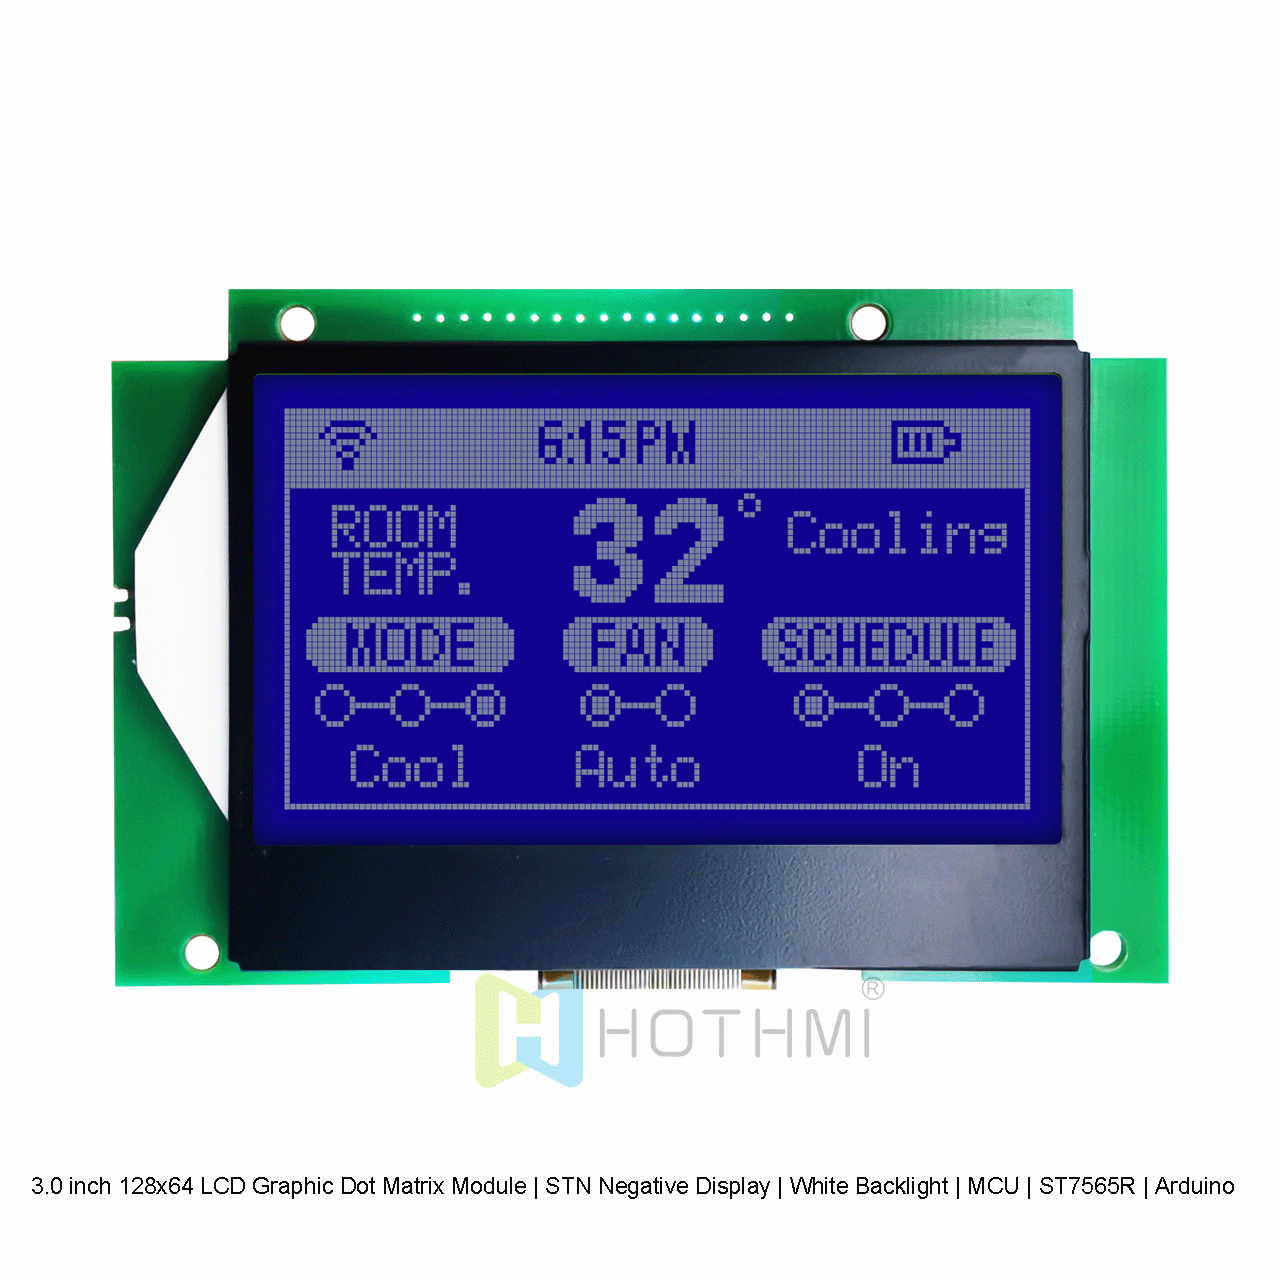 3.0 inch 128x64 LCD Graphic Dot Matrix Module | STN Negative Display | White Backlight | MCU | ST7565R | Arduino | White Text on Blue Background